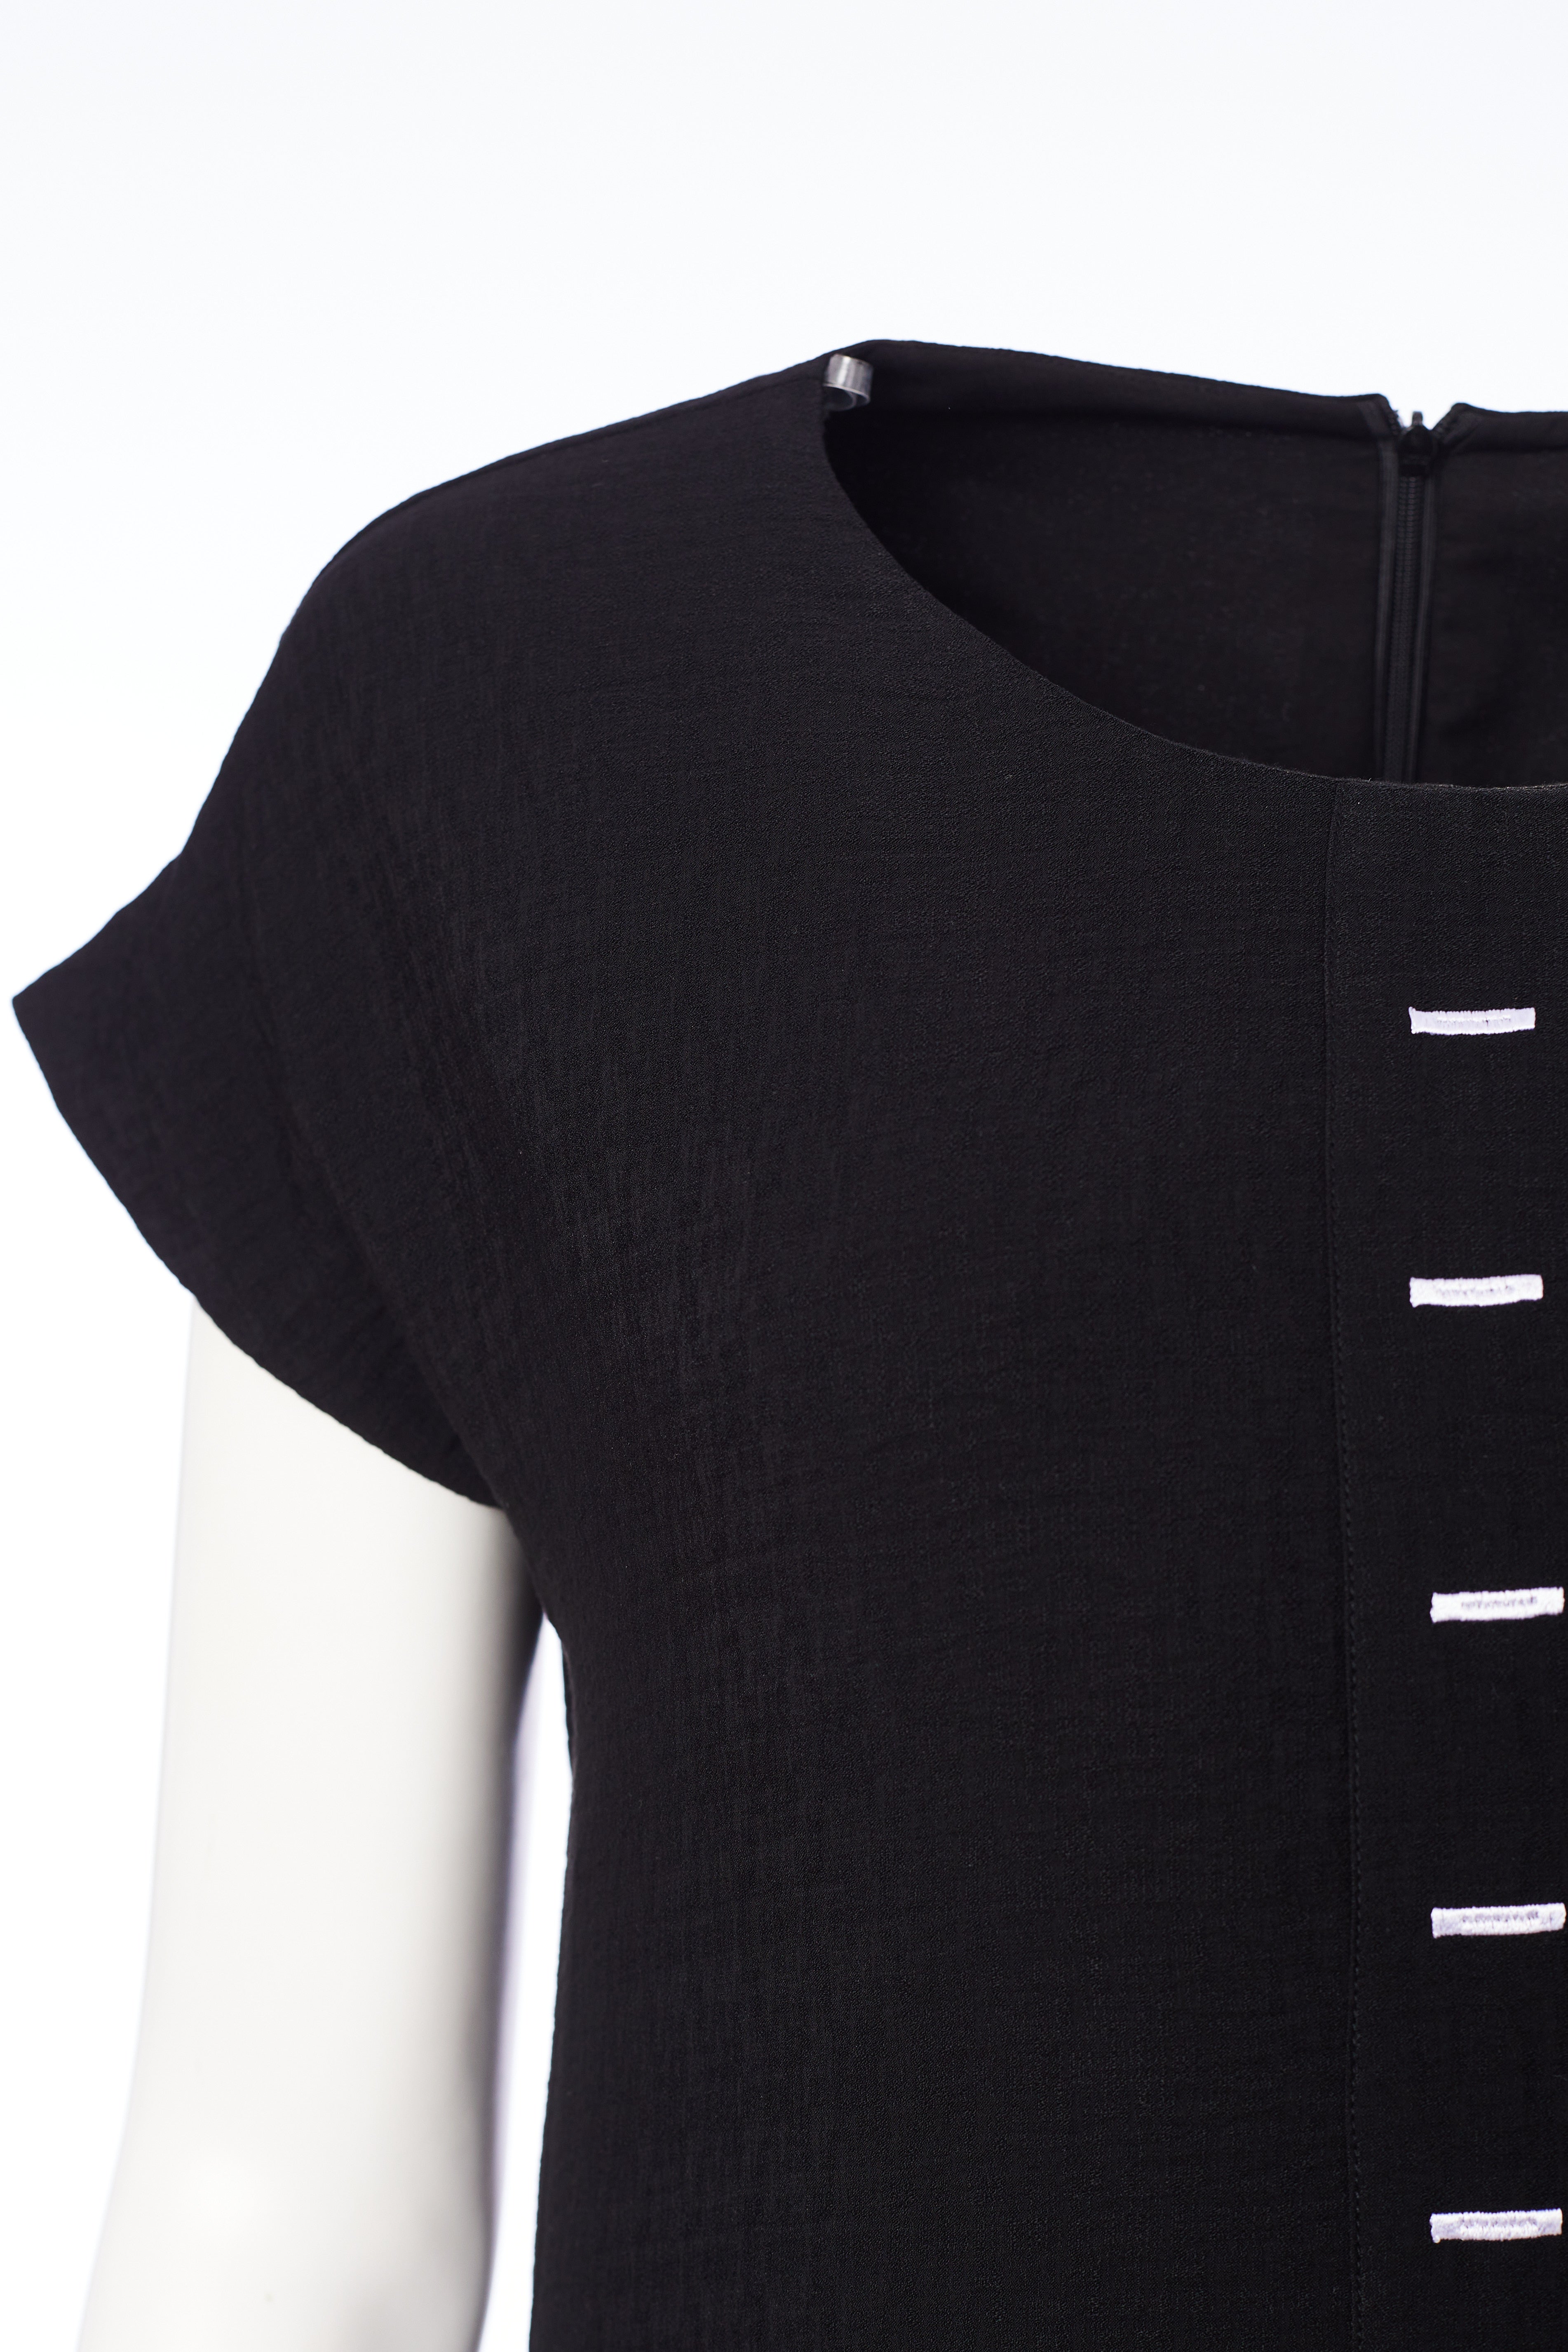 Dress with Buttonhole Detail in Black/White